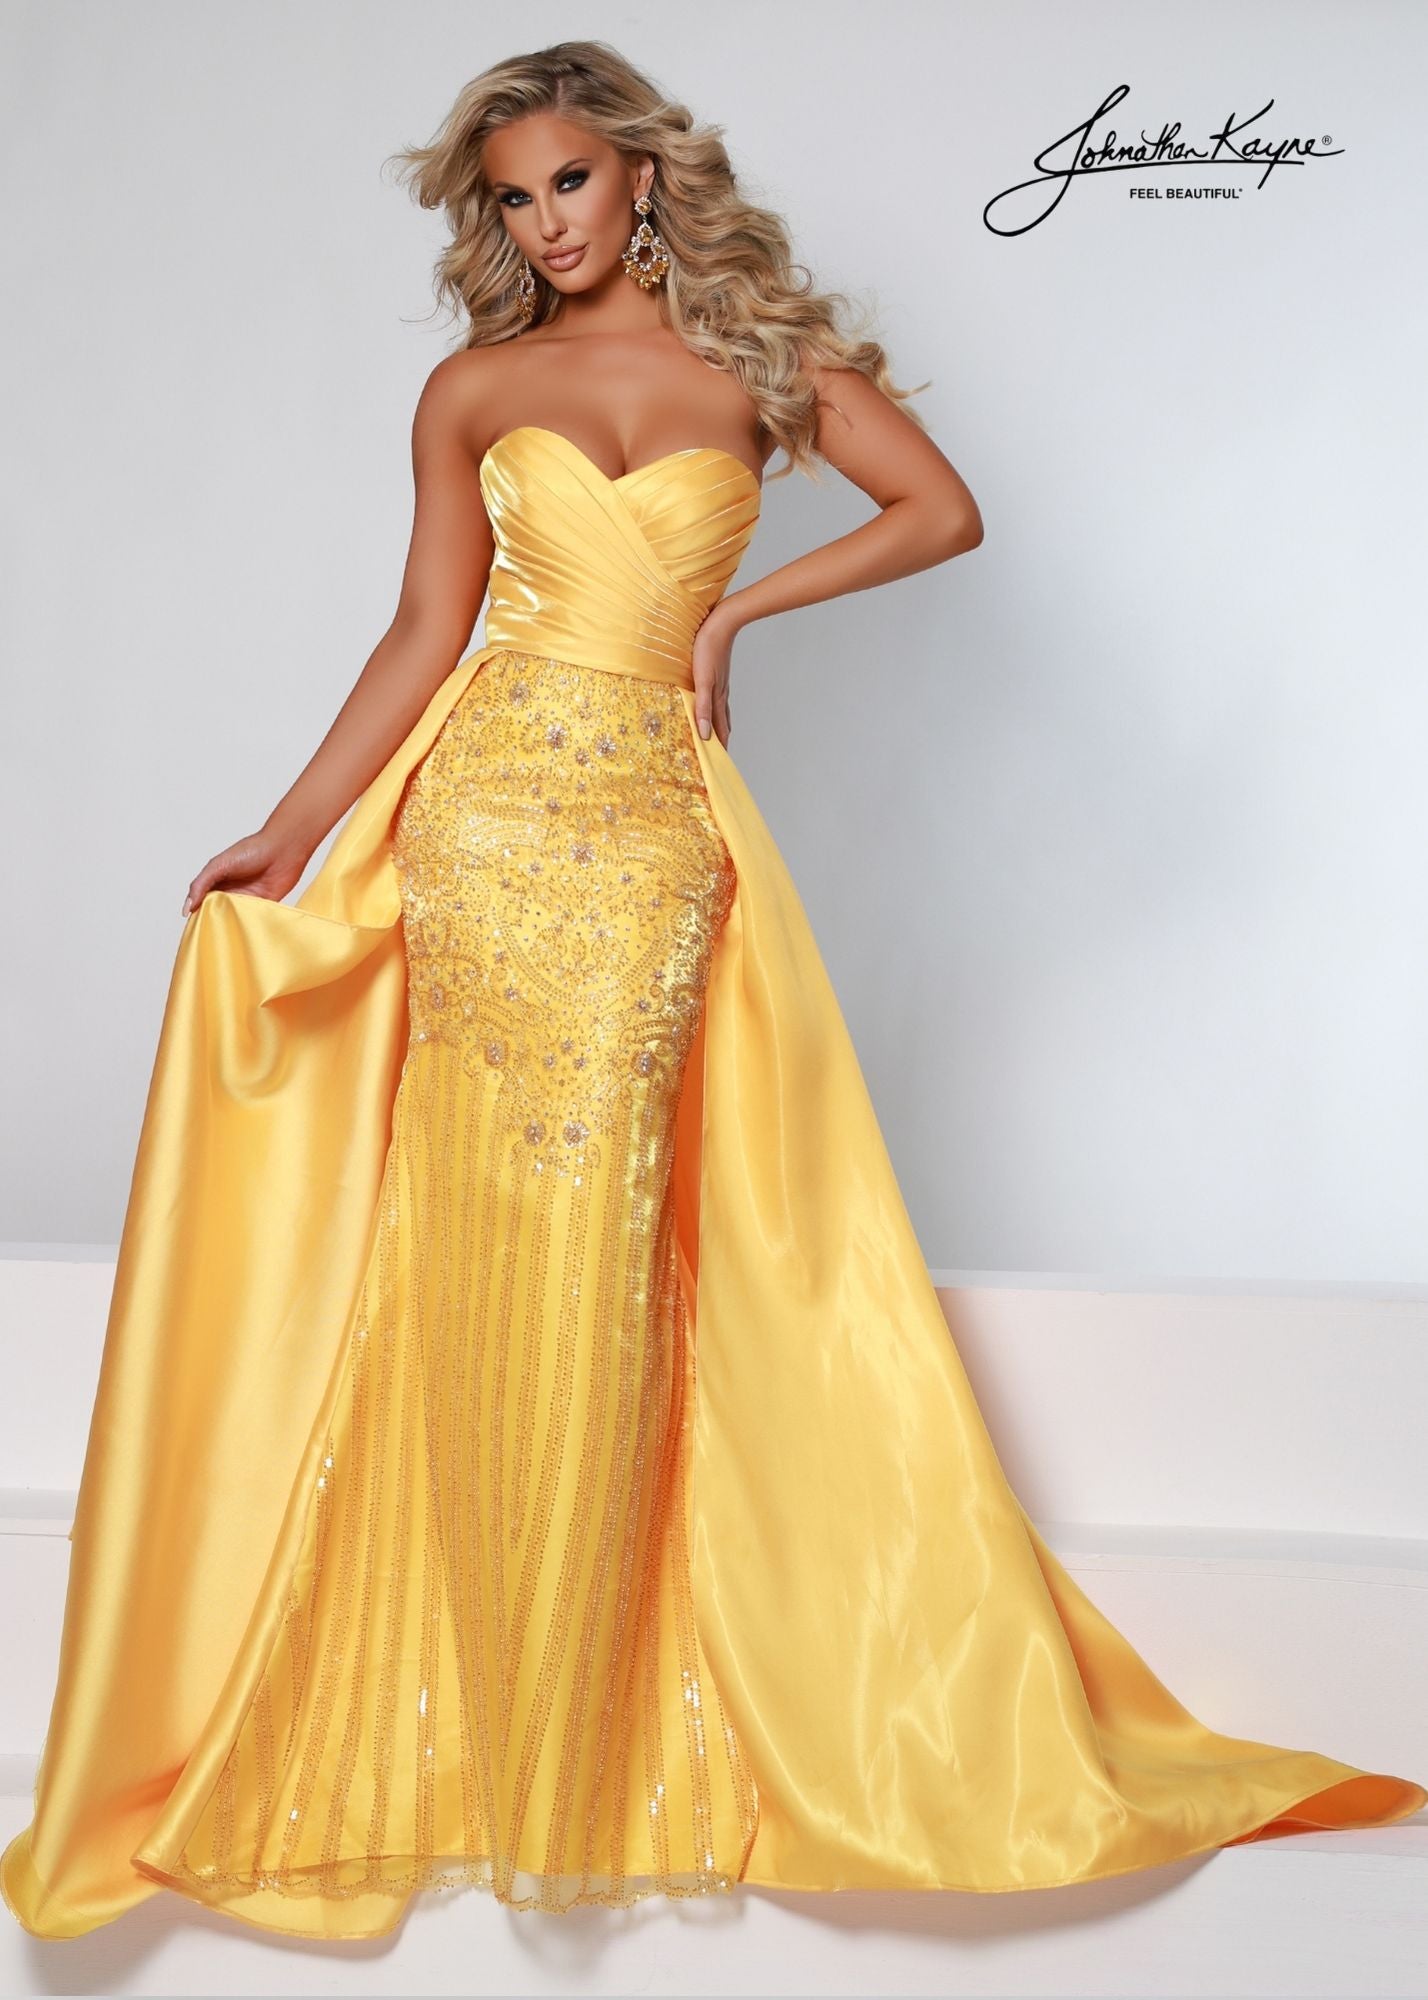 Johnathan Kayne 2502 Shimmer Satin Fitted strapless sweetheart neckline Pageant Dress. Crystal Rhinestone Embellished Bodice with a flowing Overskirt. This Formal Gown Features removable Puff Sleeves for a Fairy Tale Look!  Available Sizes: 00, 0, 2, 4, 6, 8, 10, 12, 14, 16  Available Colors: Marigold, White